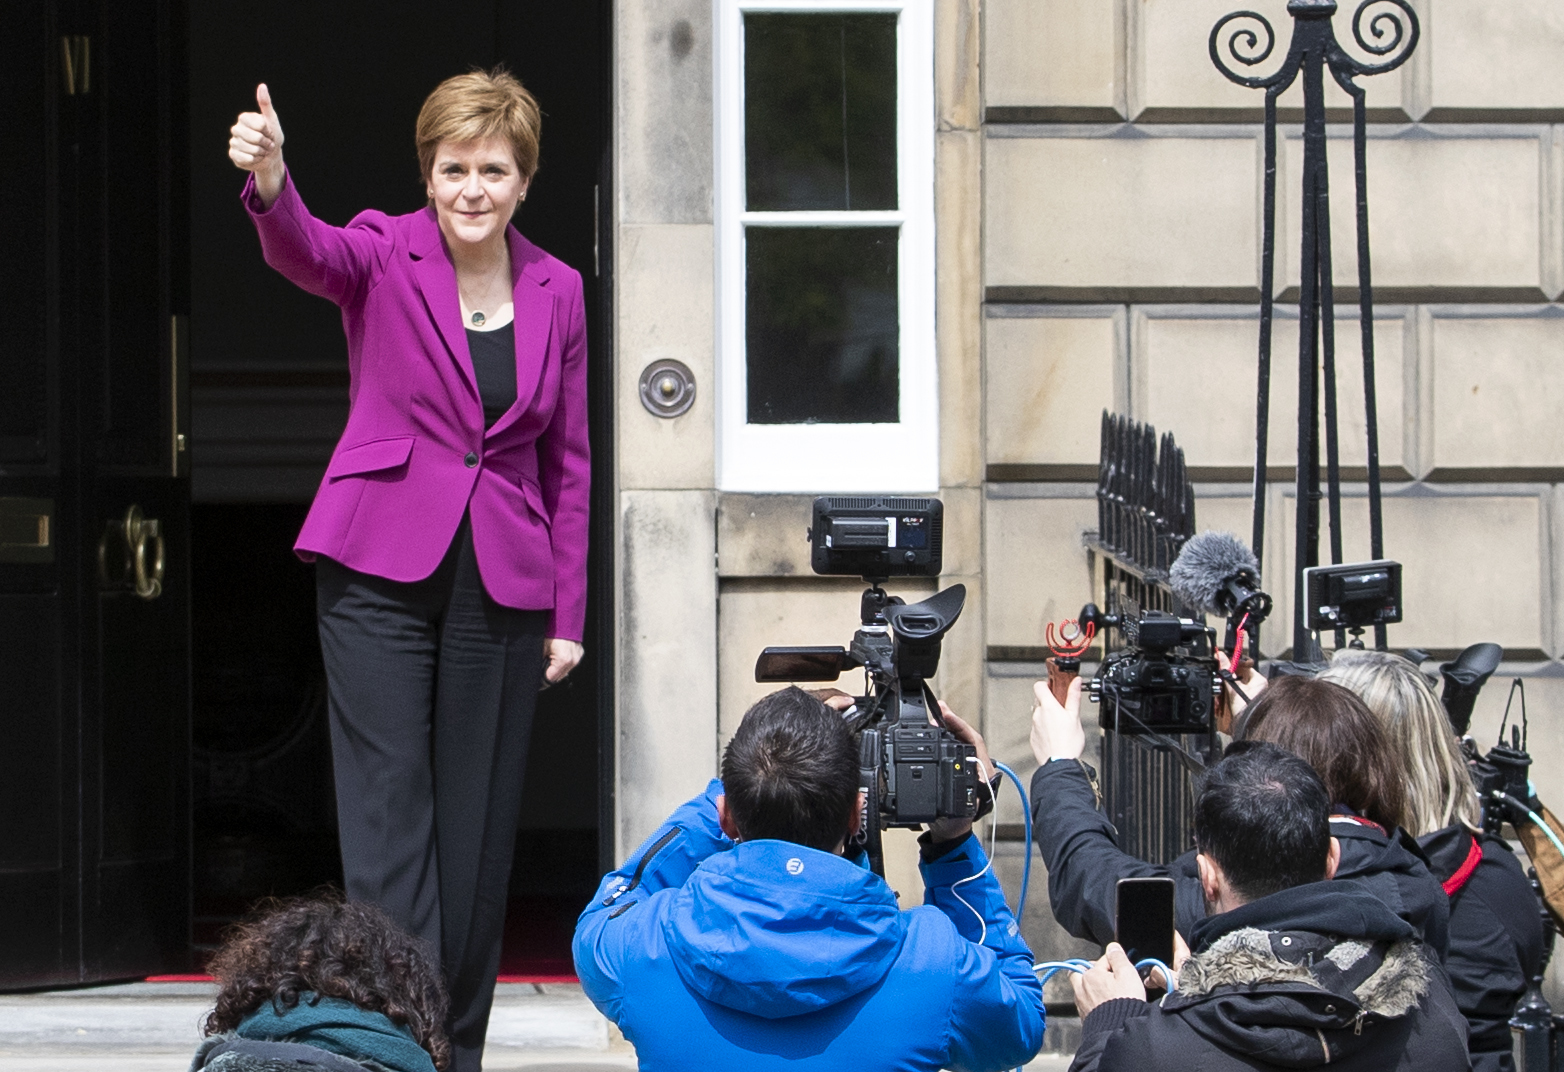 Nicola Sturgeon announces new Scottish Cabinet after post-election reshuffle